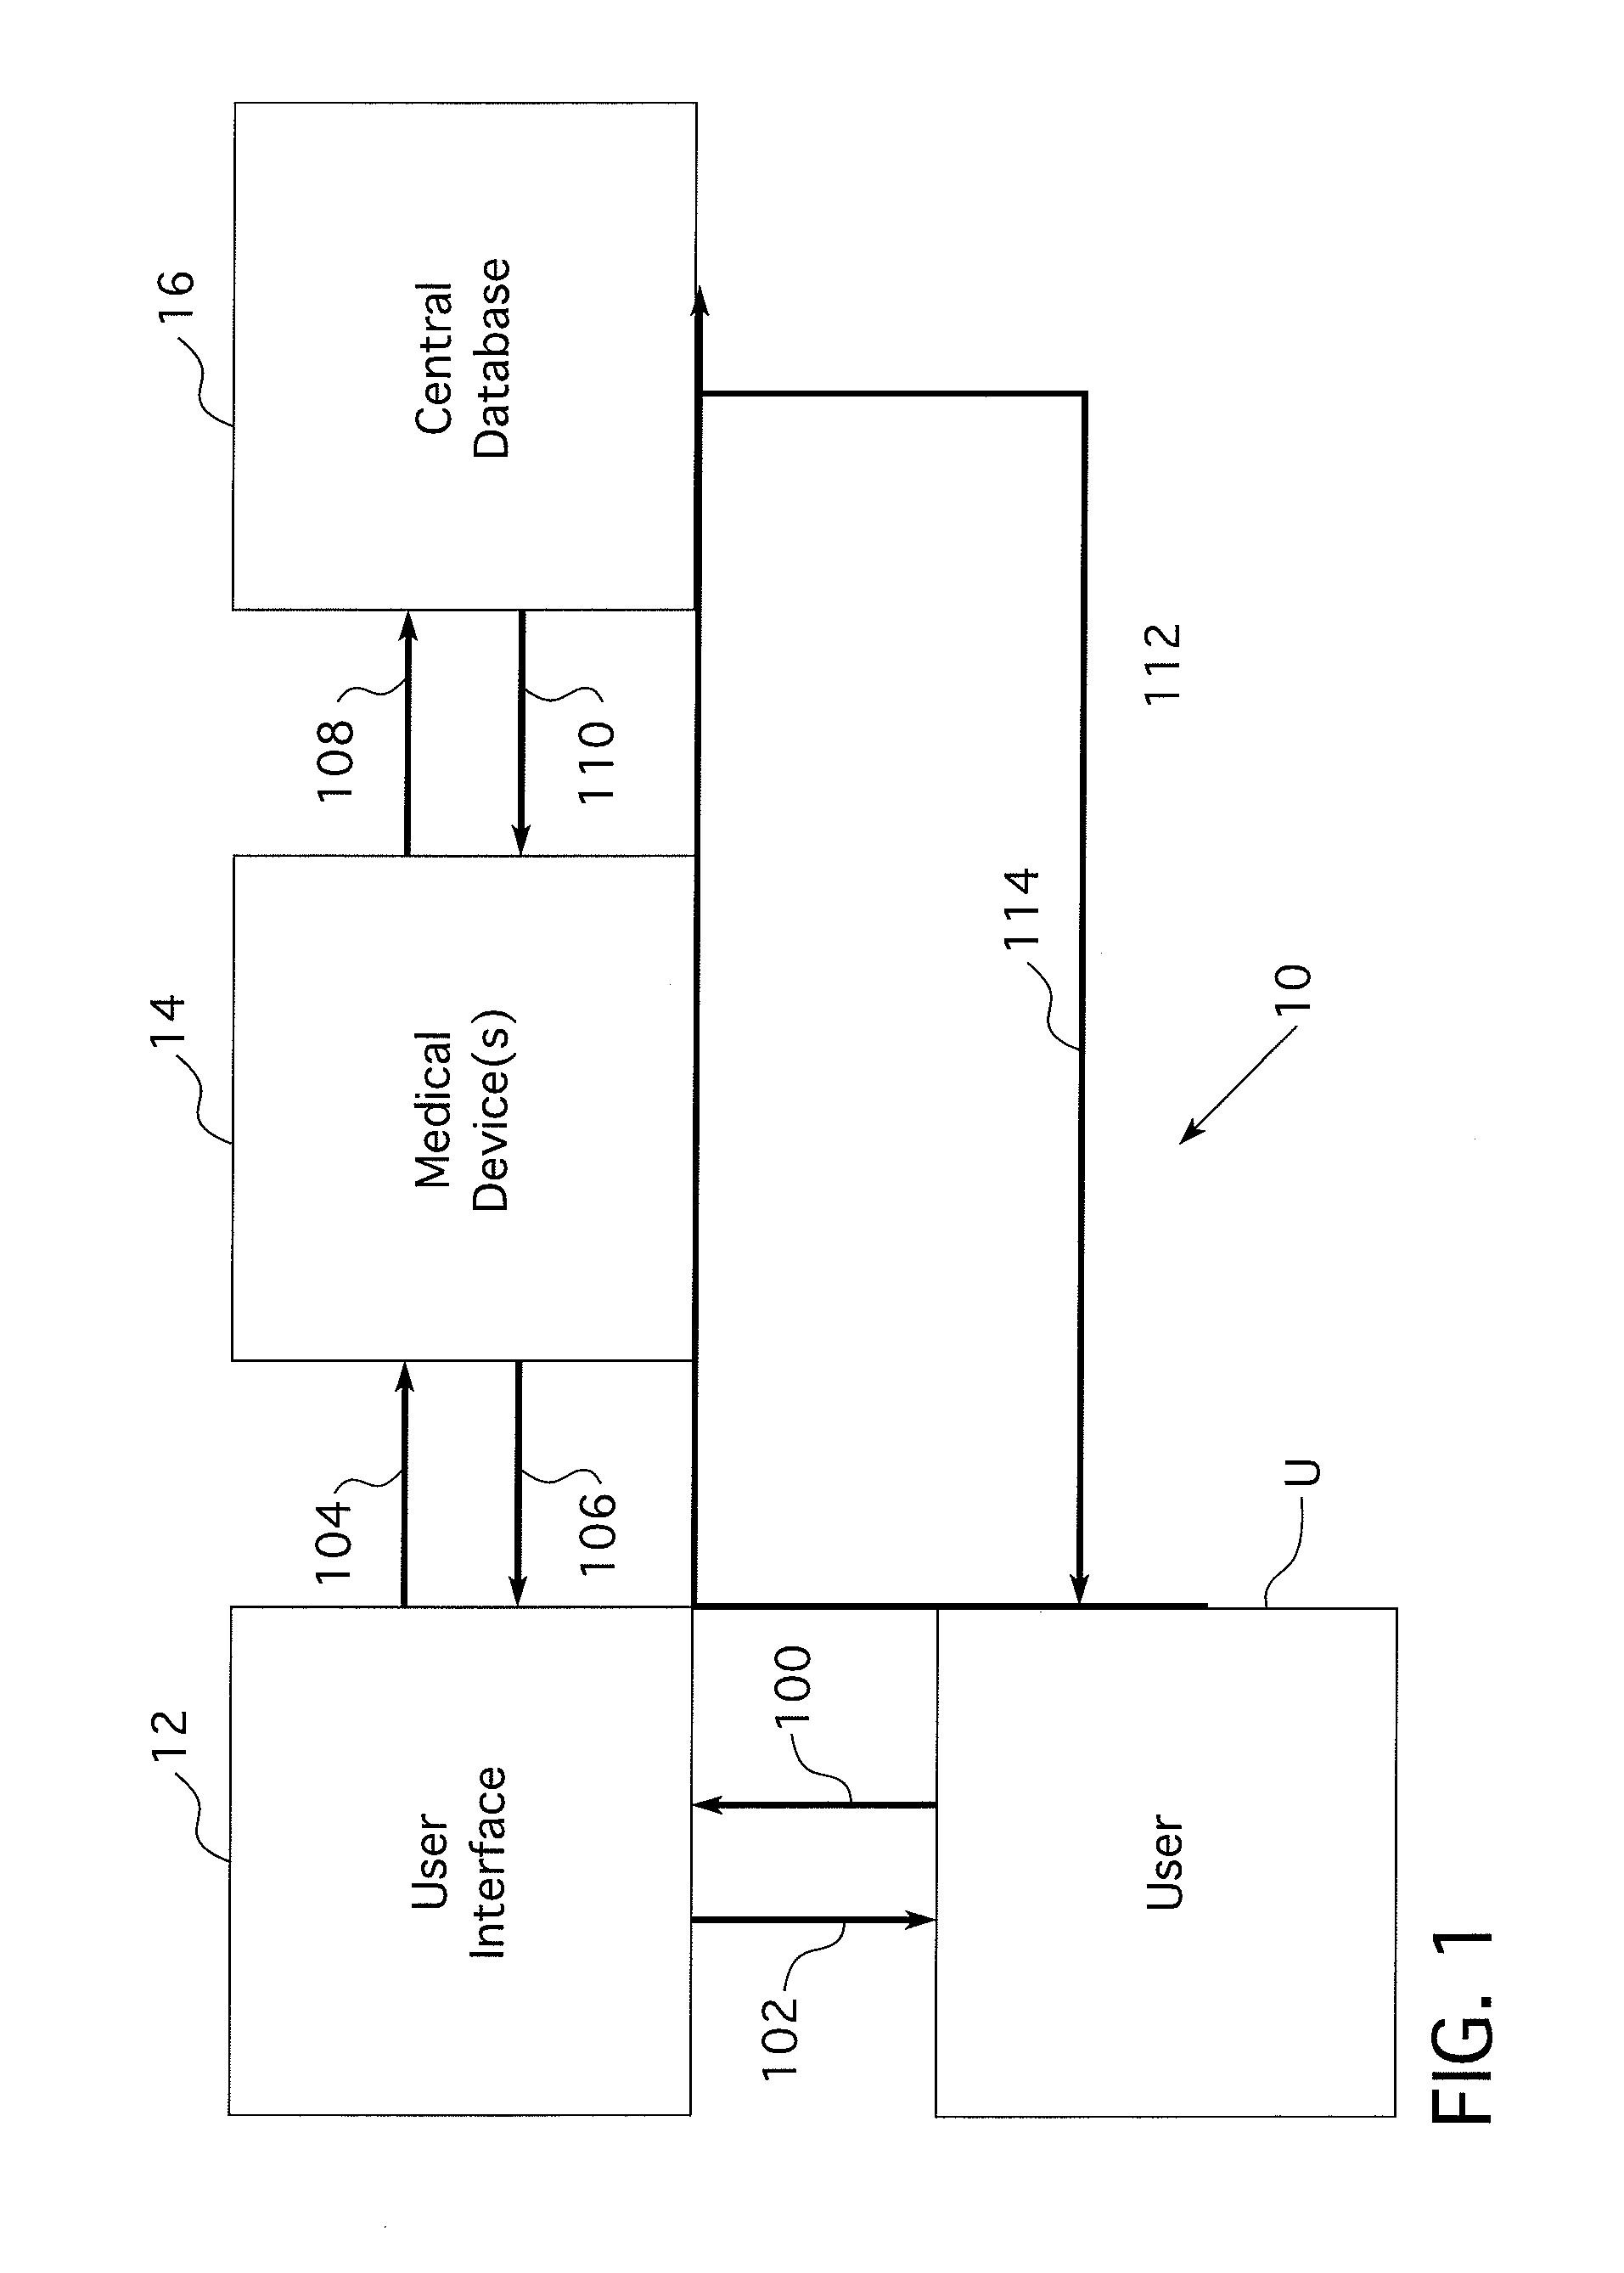 System and method for automated benchmarking for the recognition of best medical practices and products and for establishing standards for medical procedures